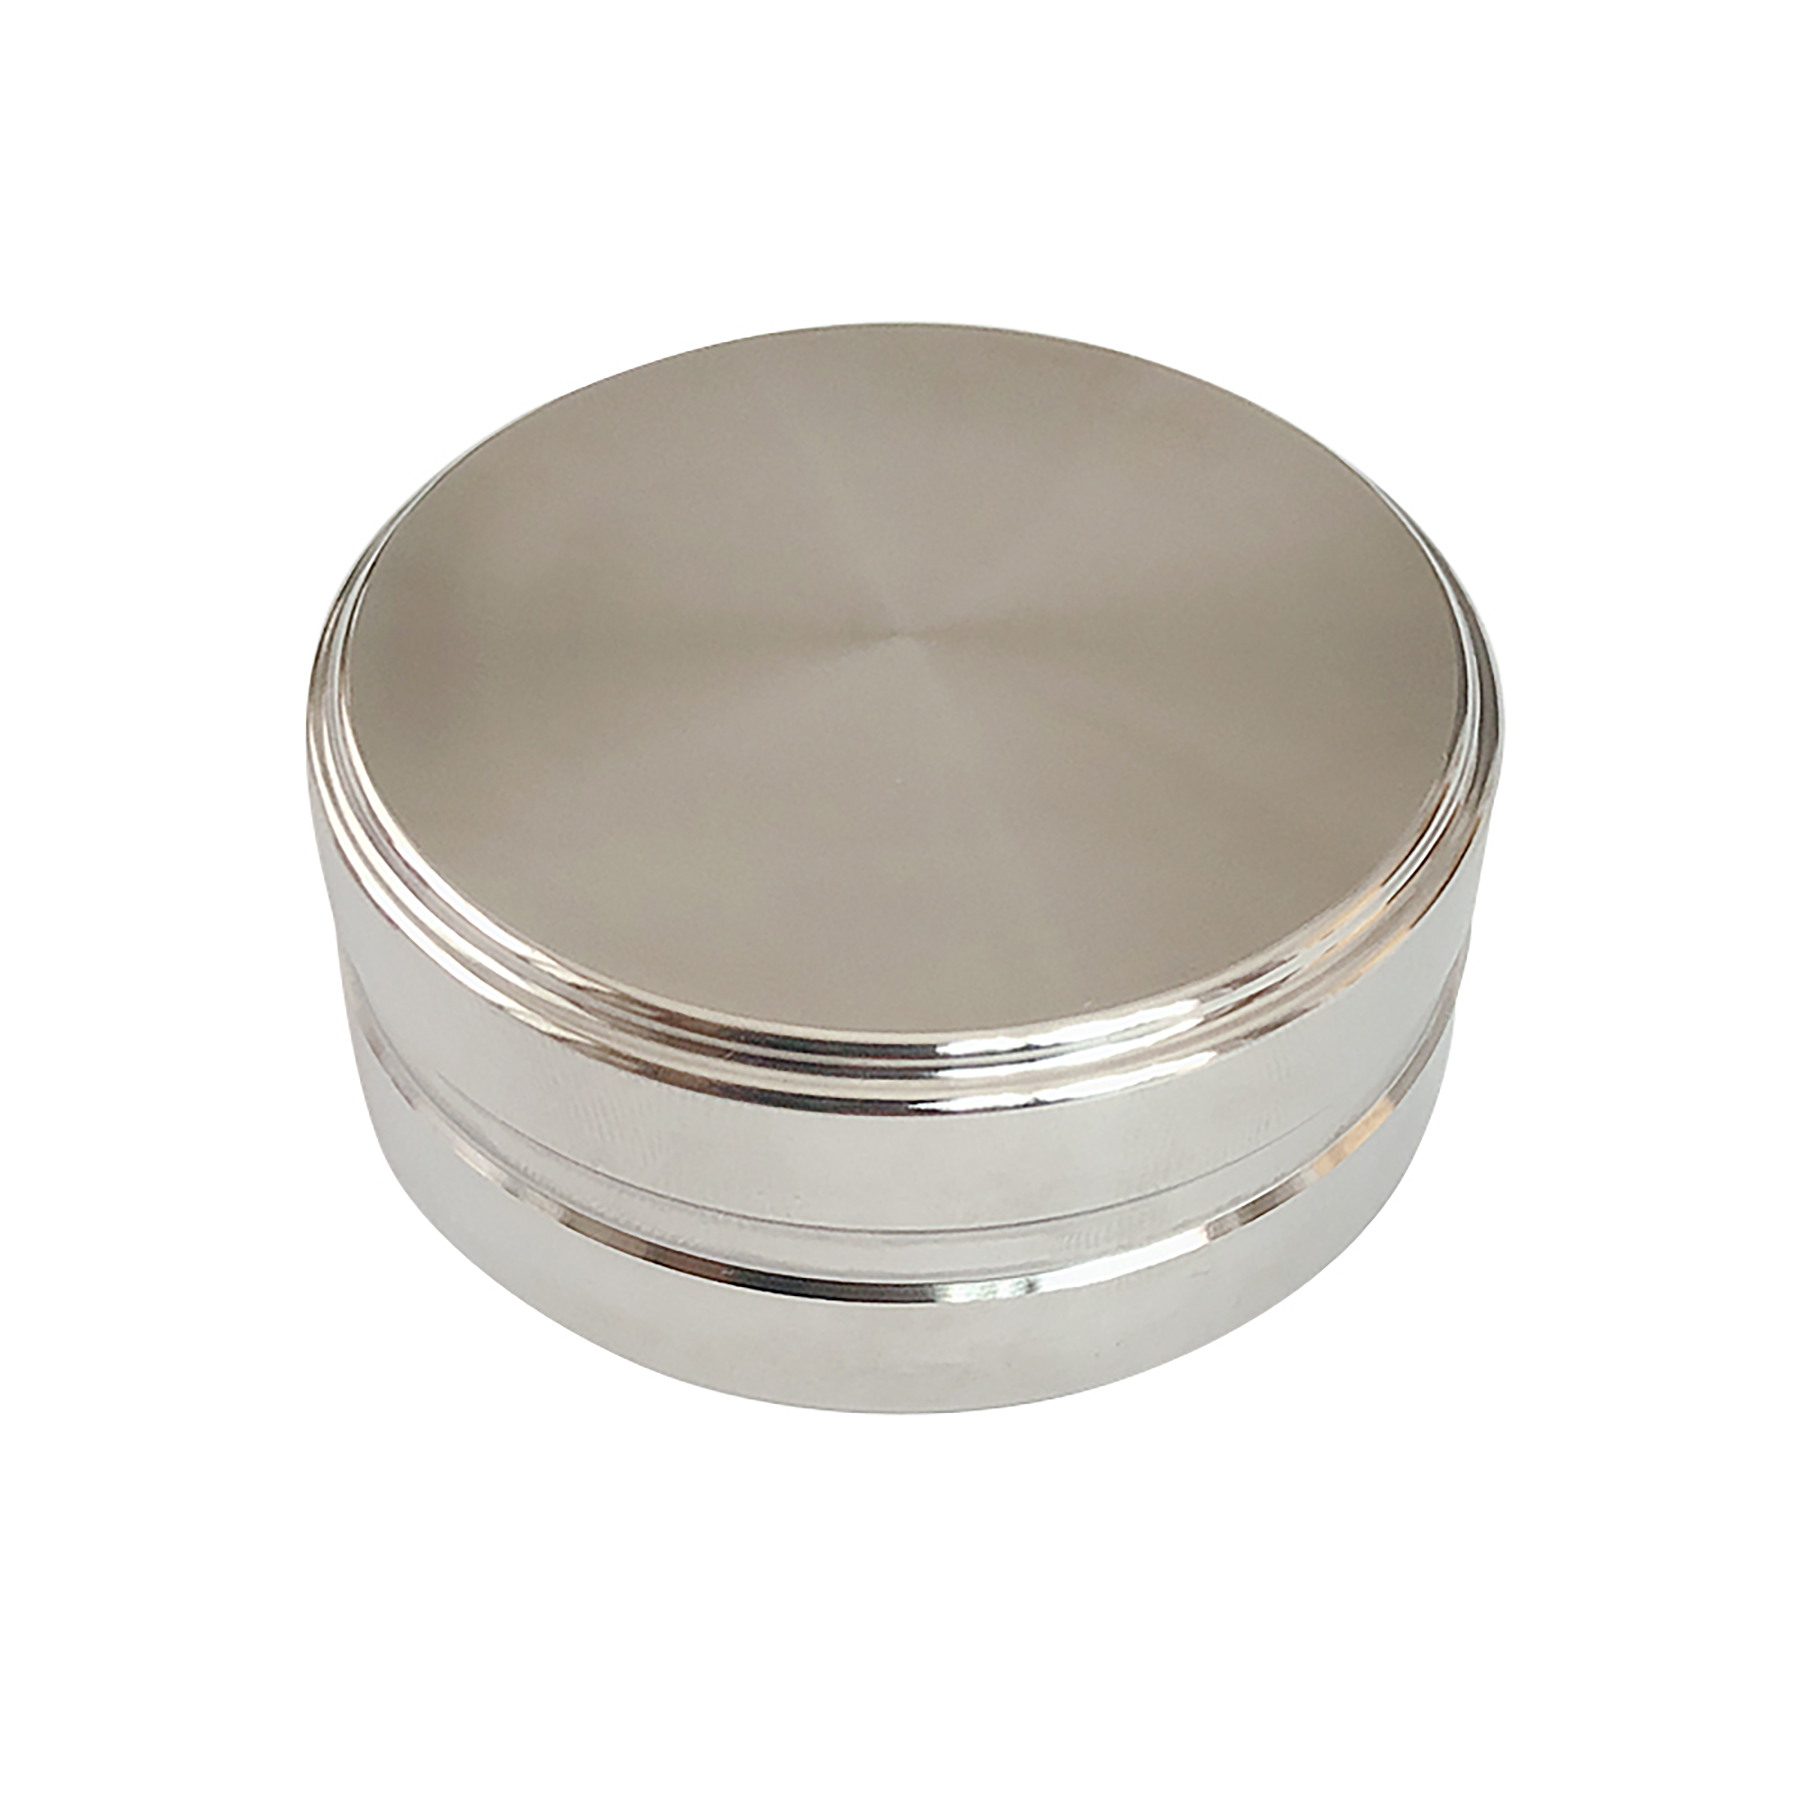 2 inch Dia Round Stainless Steel Paperweight